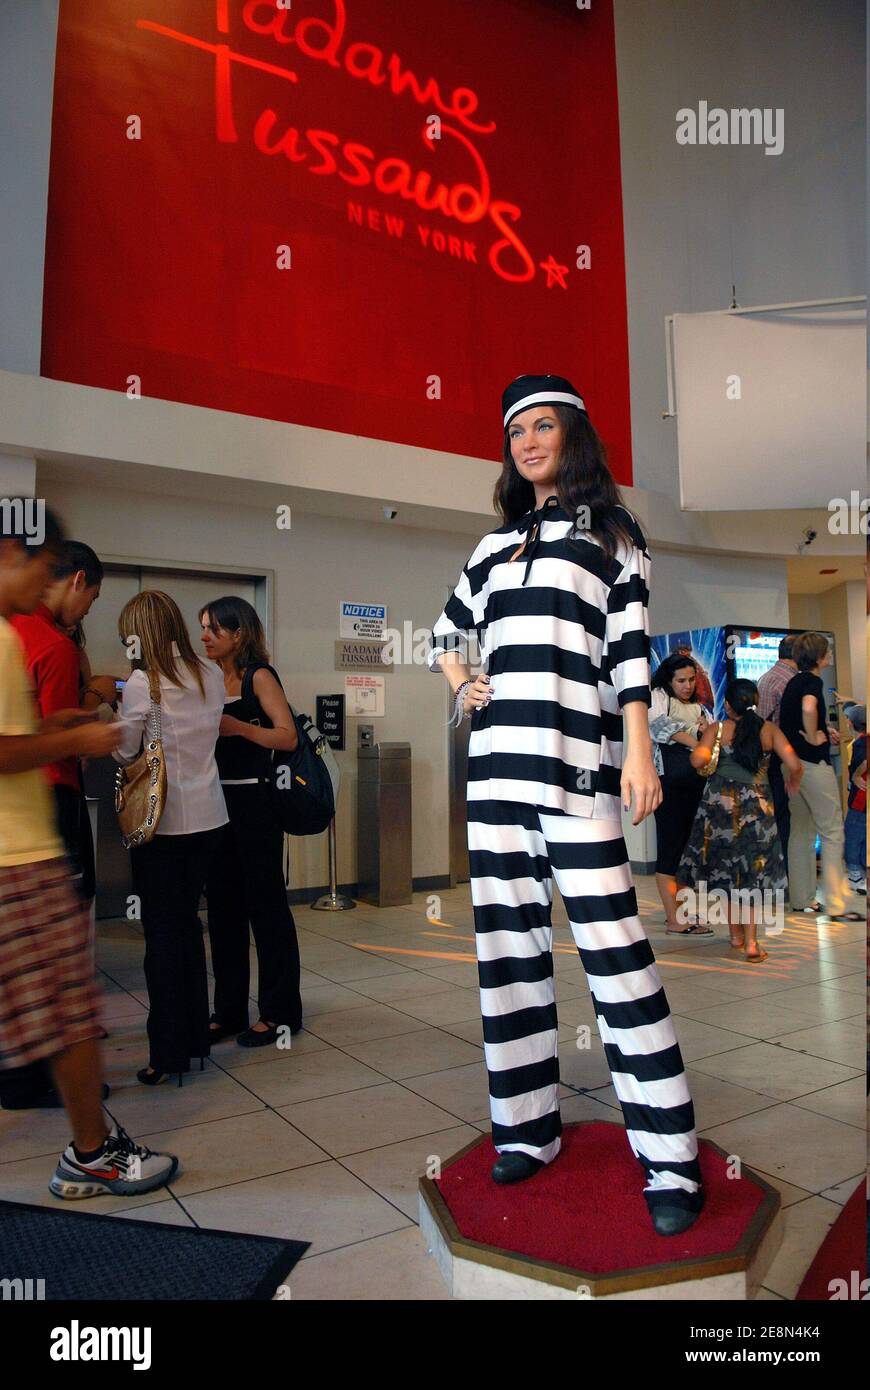 The wax figure of Lindsay Lohan wearing a black and white Jailbird costume to reflect her latest alleged arrest on drunk driving charges appears on display at Madame Tussauds Wax Museum in New York City, NY, USA on July 24, 2007. Photo by Graylock/ABACAPRESS.COM Stock Photo